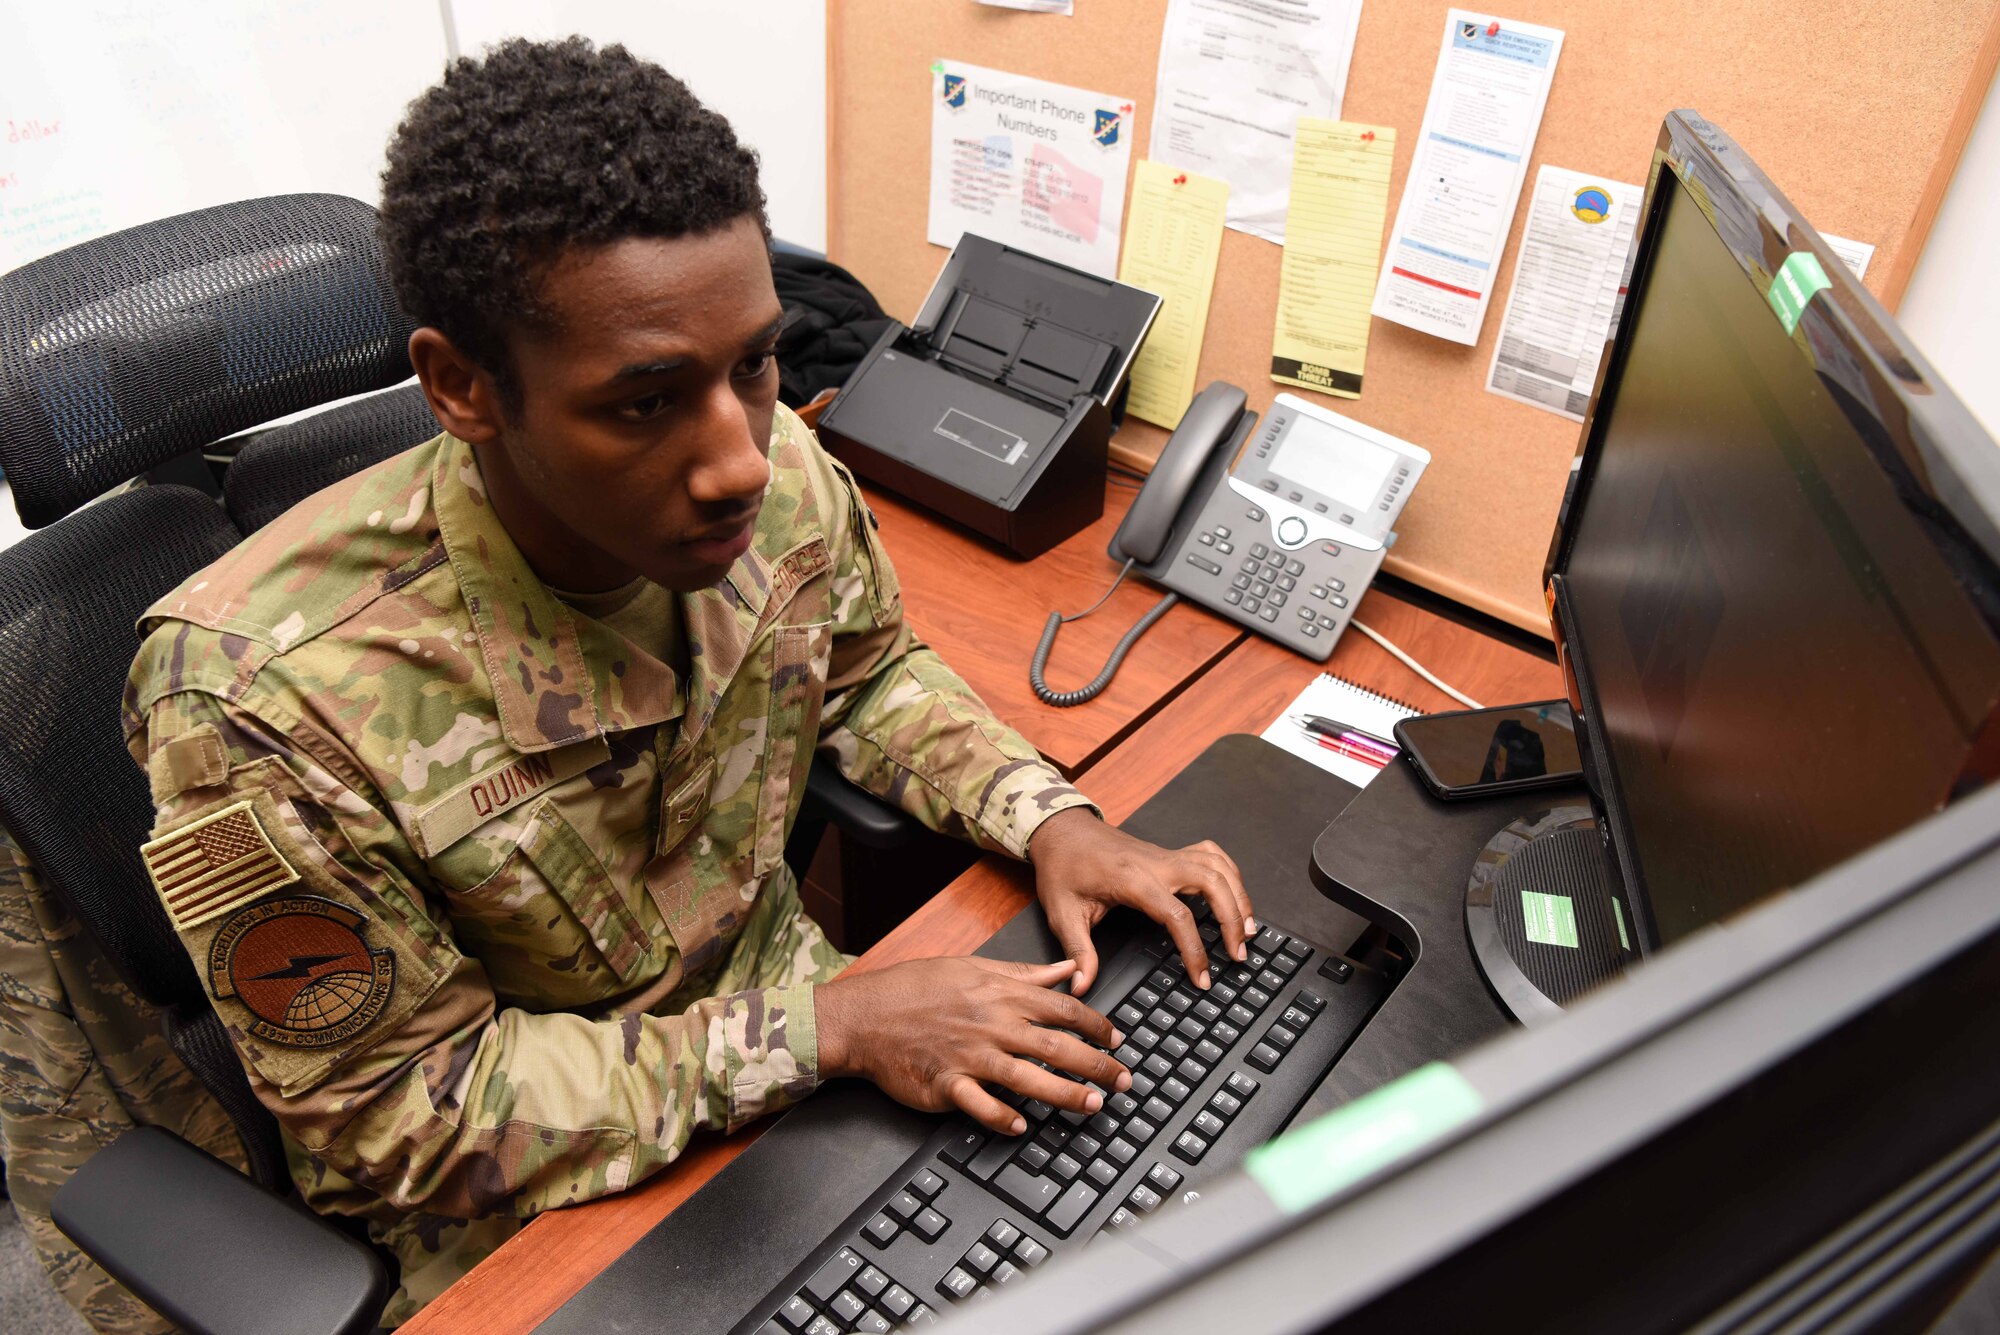 U.S. Air Force Senior Airman Tavaris Quinn, 39th Communications Squadron knowledge management technician, manages teleworking websites, May 5, 2020, at Incirlik Air Base, Turkey. Knowledge management technicians maintain and ensure teleworking programs continue to be accessible from home. (U.S. Air Force photo by Tech. Sgt. Jim Araos)